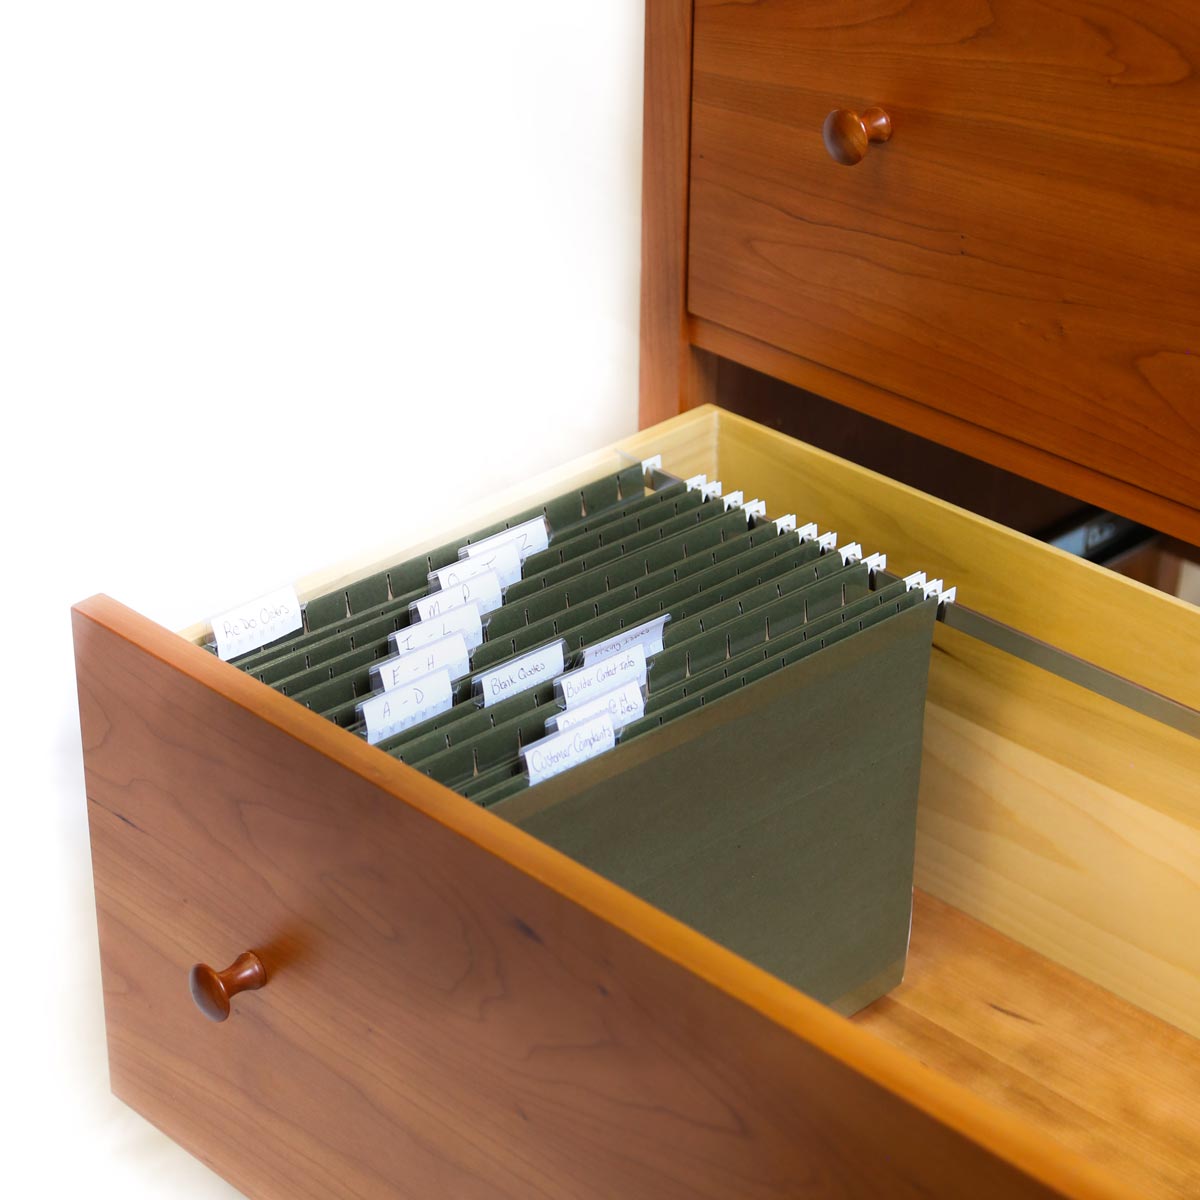 Open drawer of large Shaker file office storage with green files inside